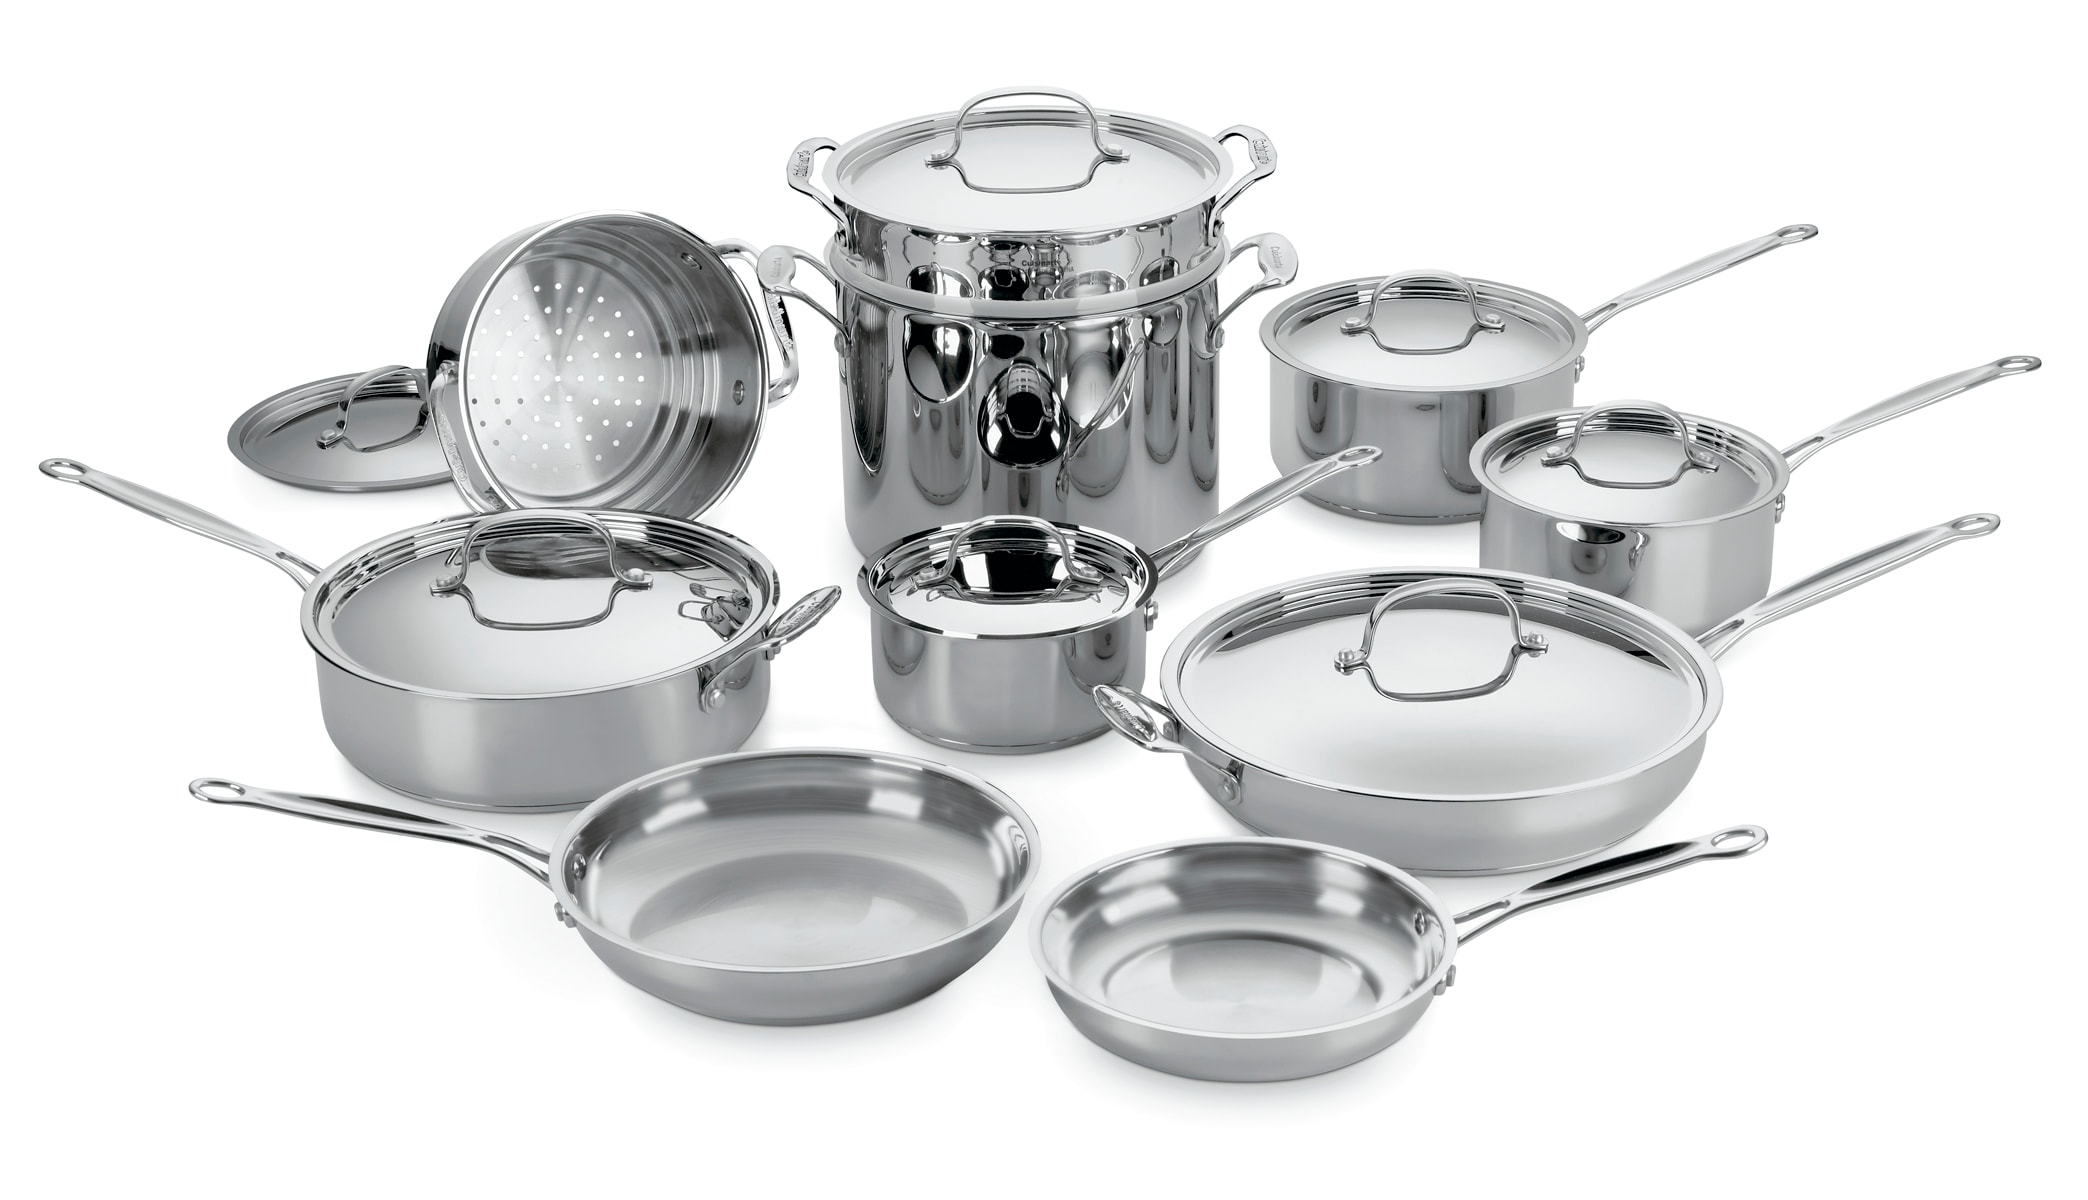 Cuisinart Chef's Classic 17-piece Hard Anodized Cookware Set